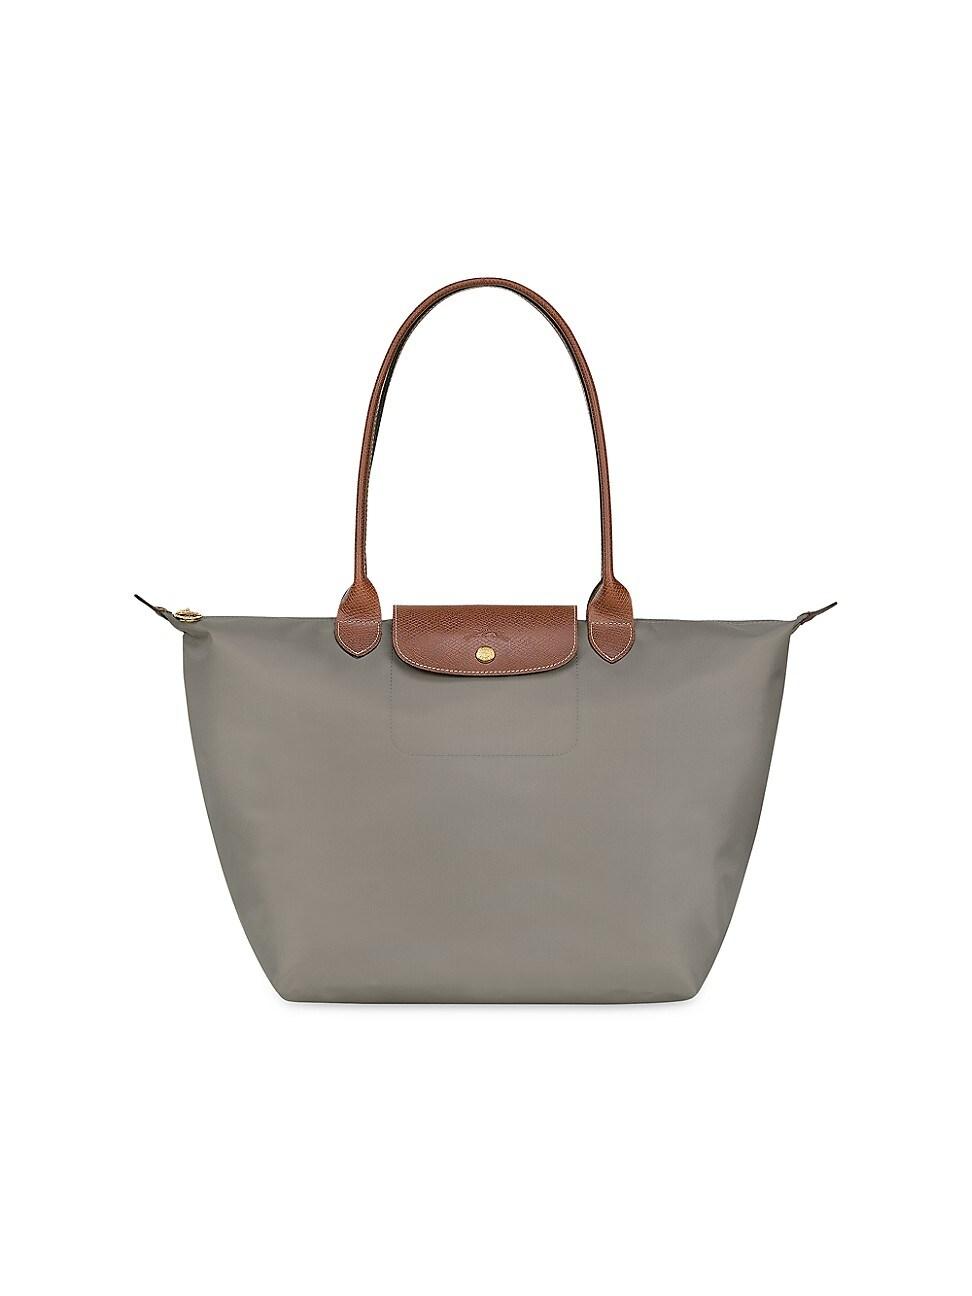 Longchamp Large Le Pliage Shoulder Tote in Gray | Lyst